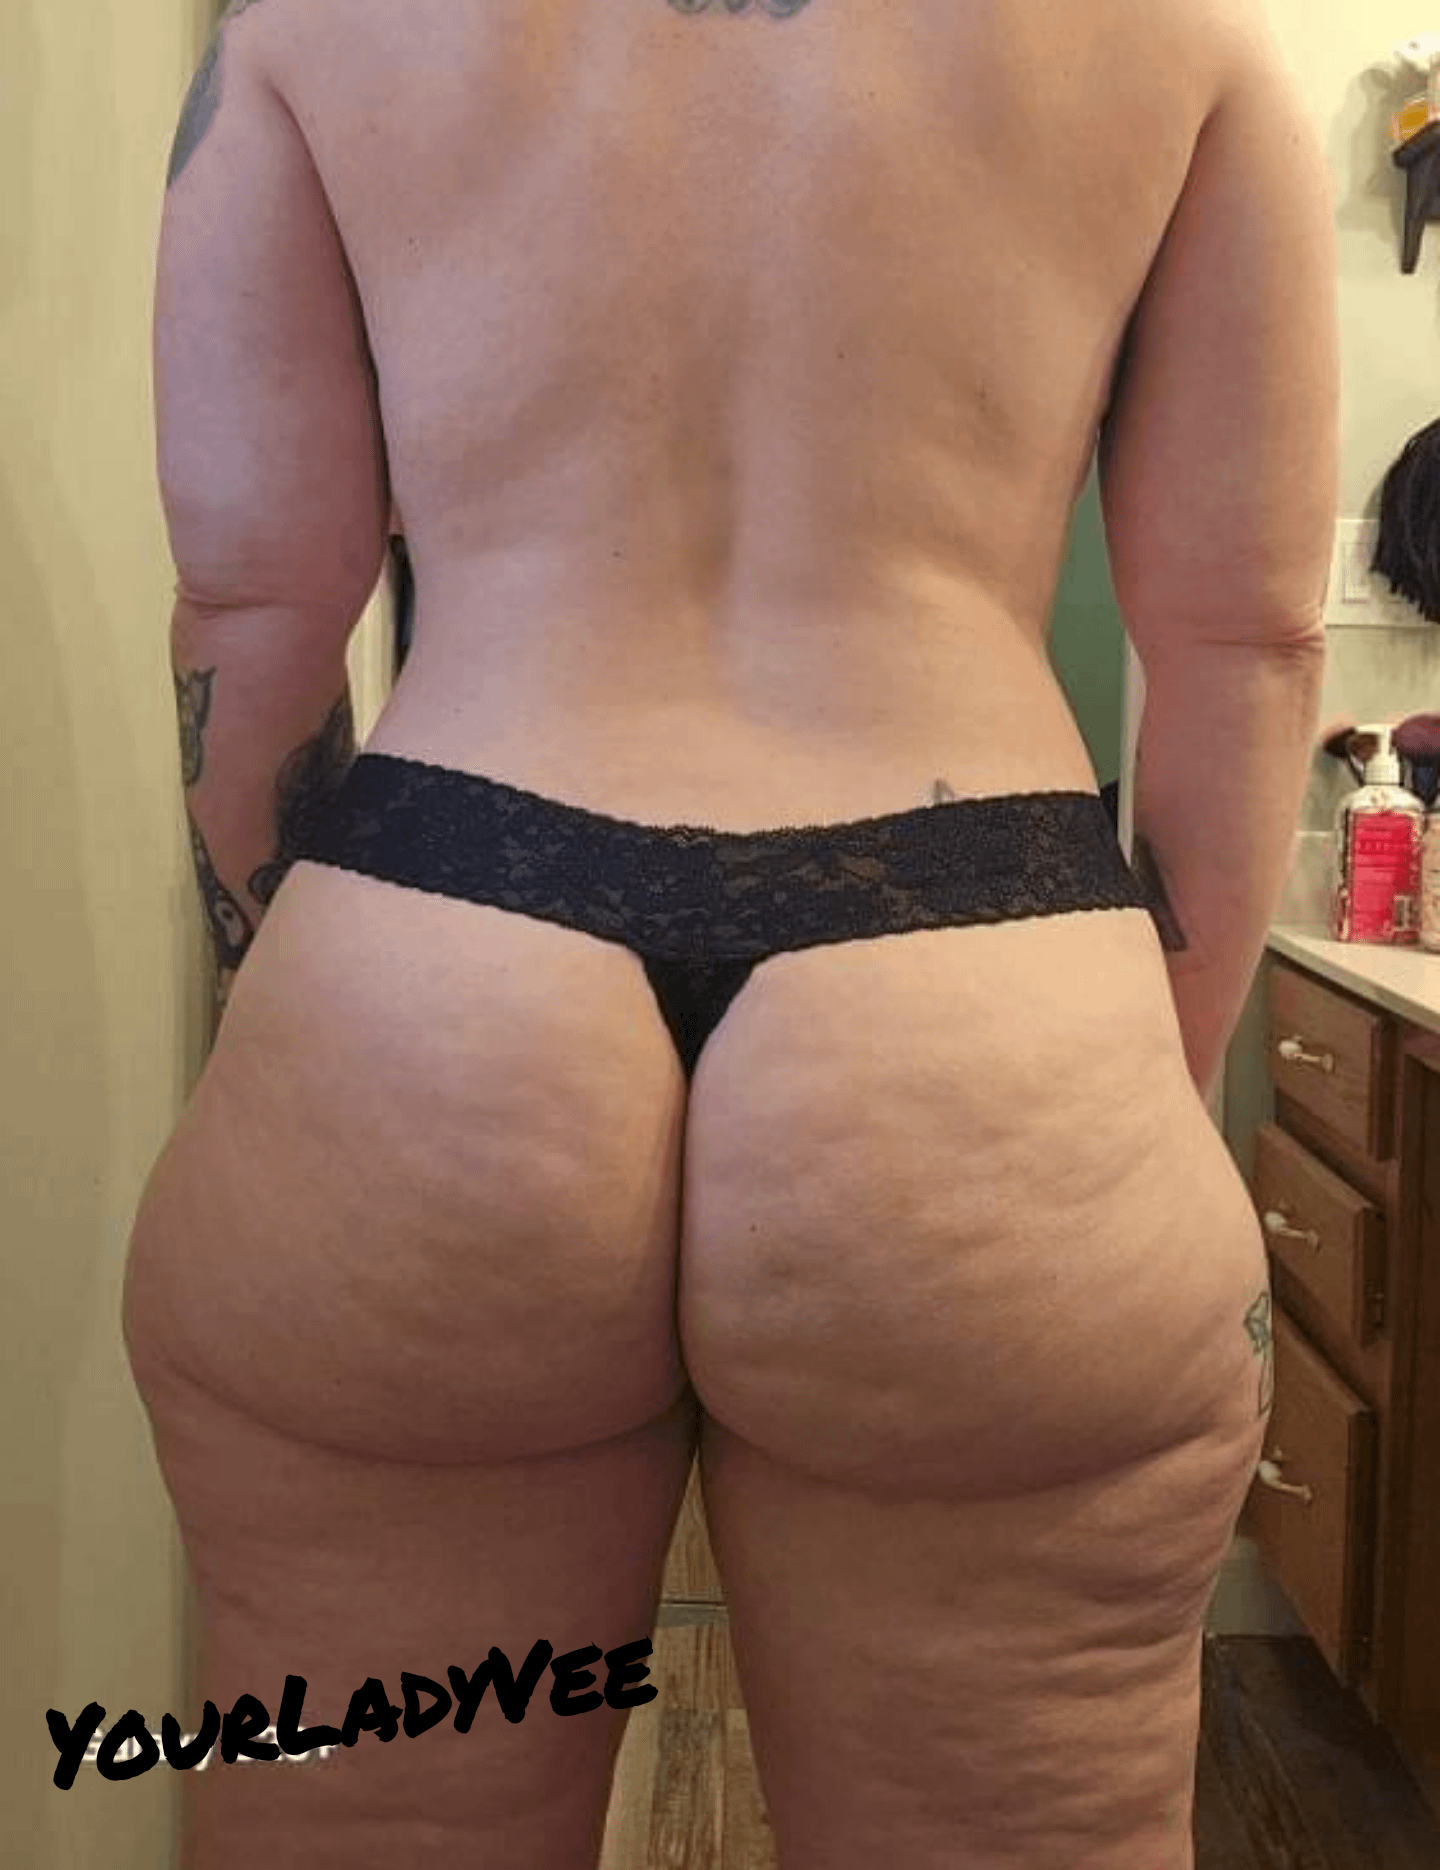 PAWG How about you bury your face in my ass